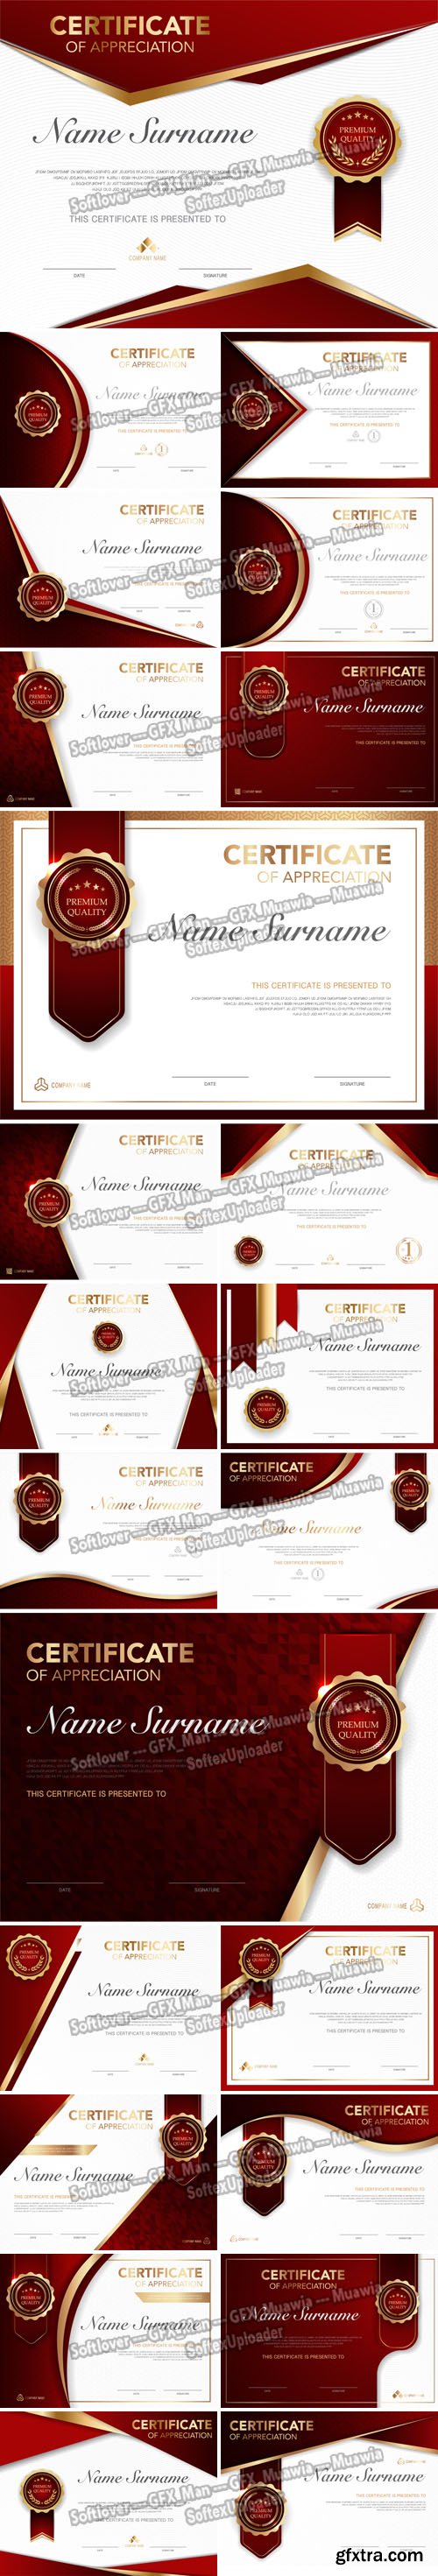 White and Red Certificates Vector Templates